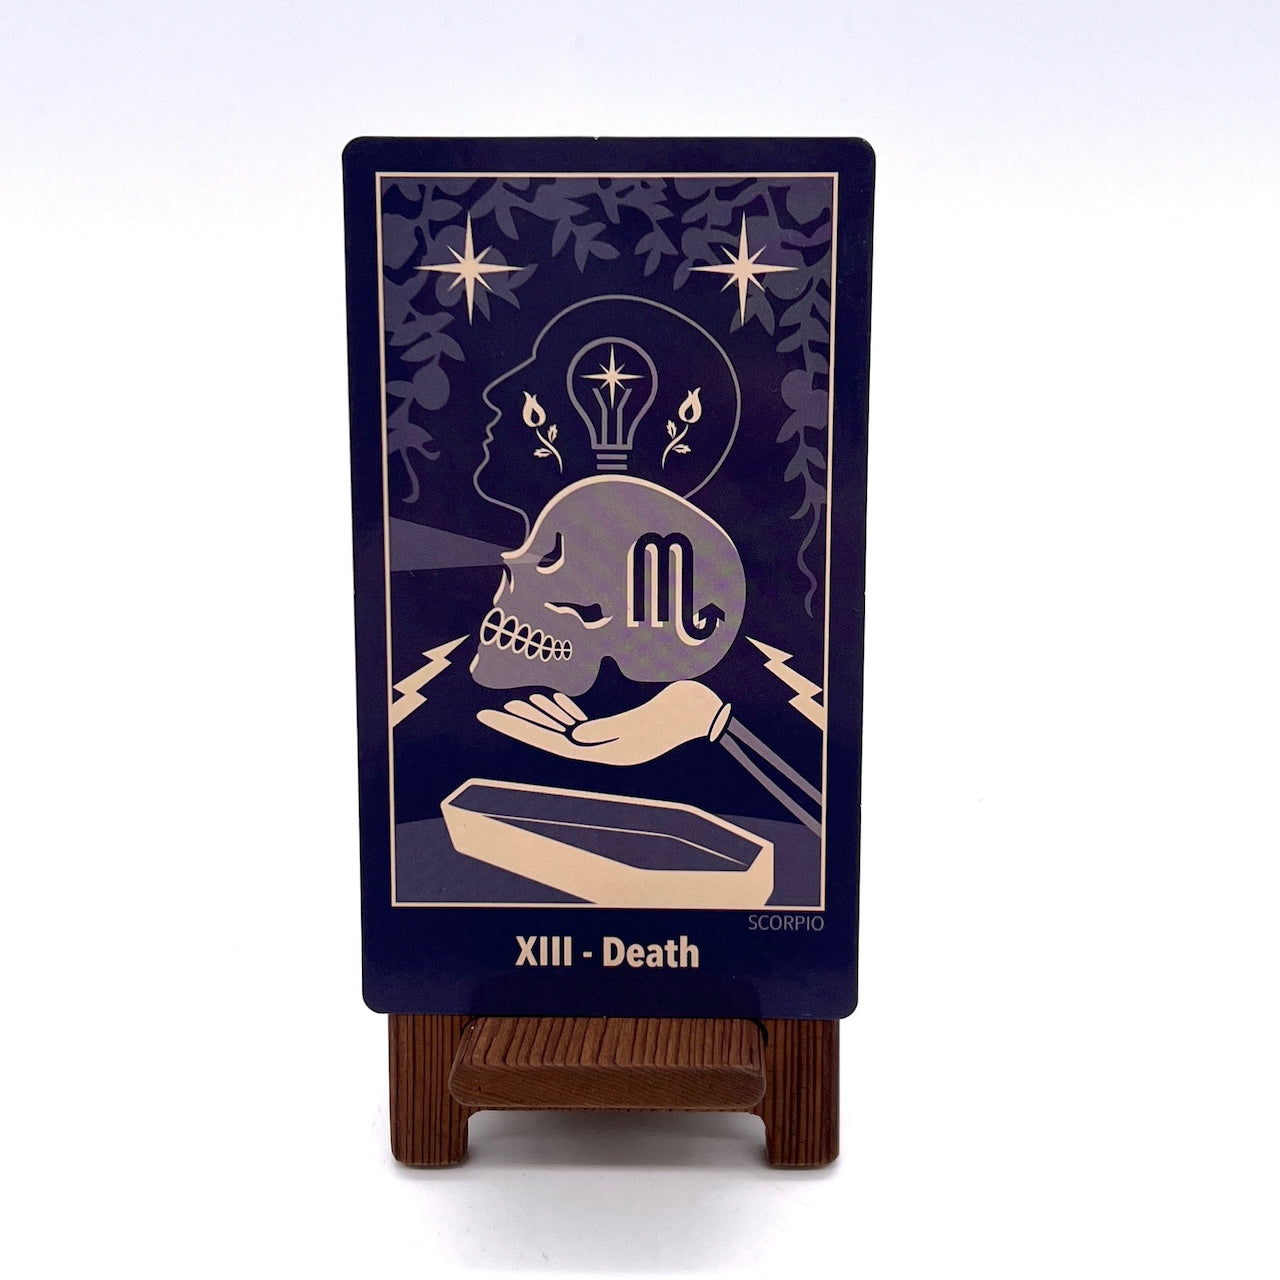 Death card from the AstroCrown tarot deck.